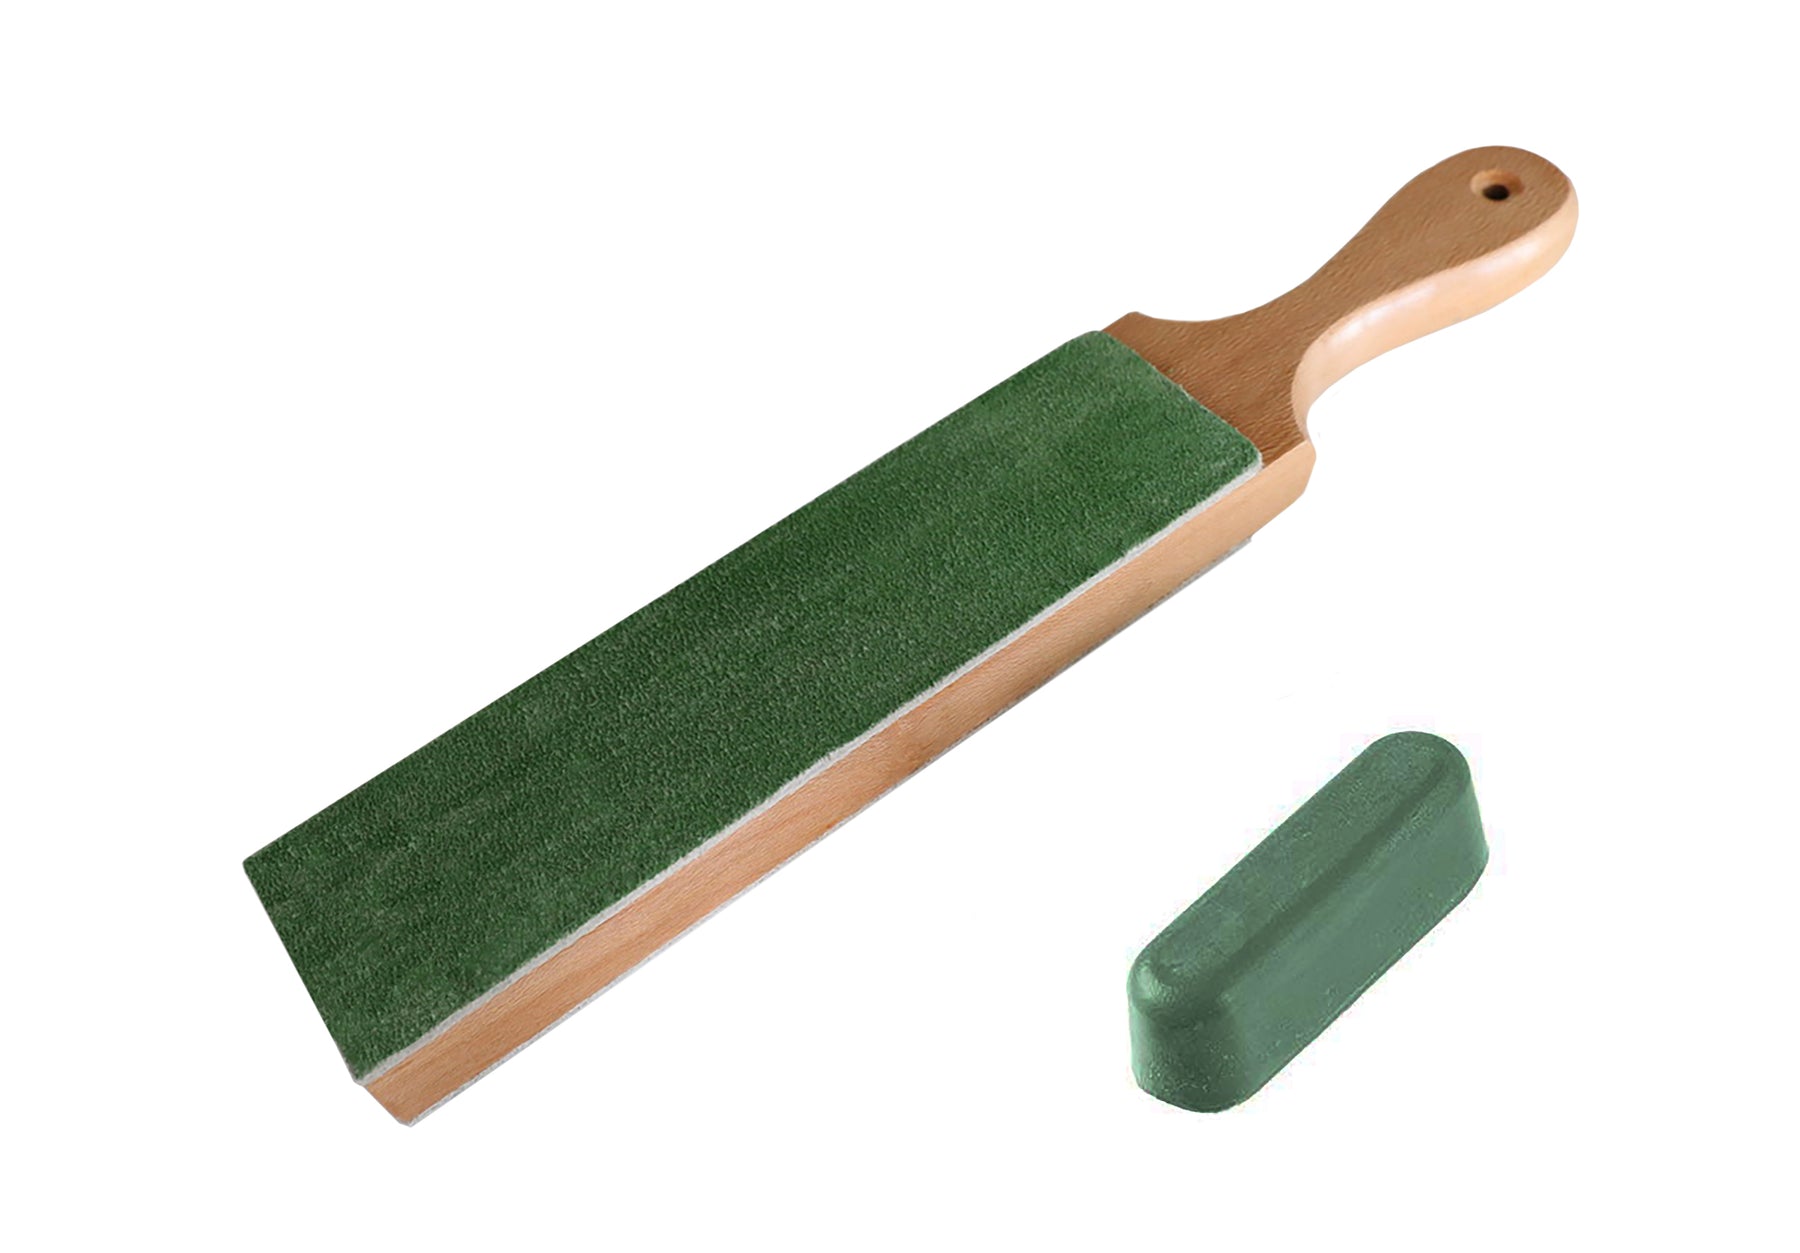 https://www.rmleathersupply.com/cdn/shop/products/Leather_Knife_Strop_Premium_Double_Sided_Horse_Butt_Leather_Wood_Base_thick_stropping_sharpening_Spyderco_leather_tools_blades_Blade_HQ_with_green_rouge_micro_hone_honing_compound_polishing_japanese_j_d735c209-912e-47cf-8273-a99a7e59e31d_1800x.jpg?v=1552515608